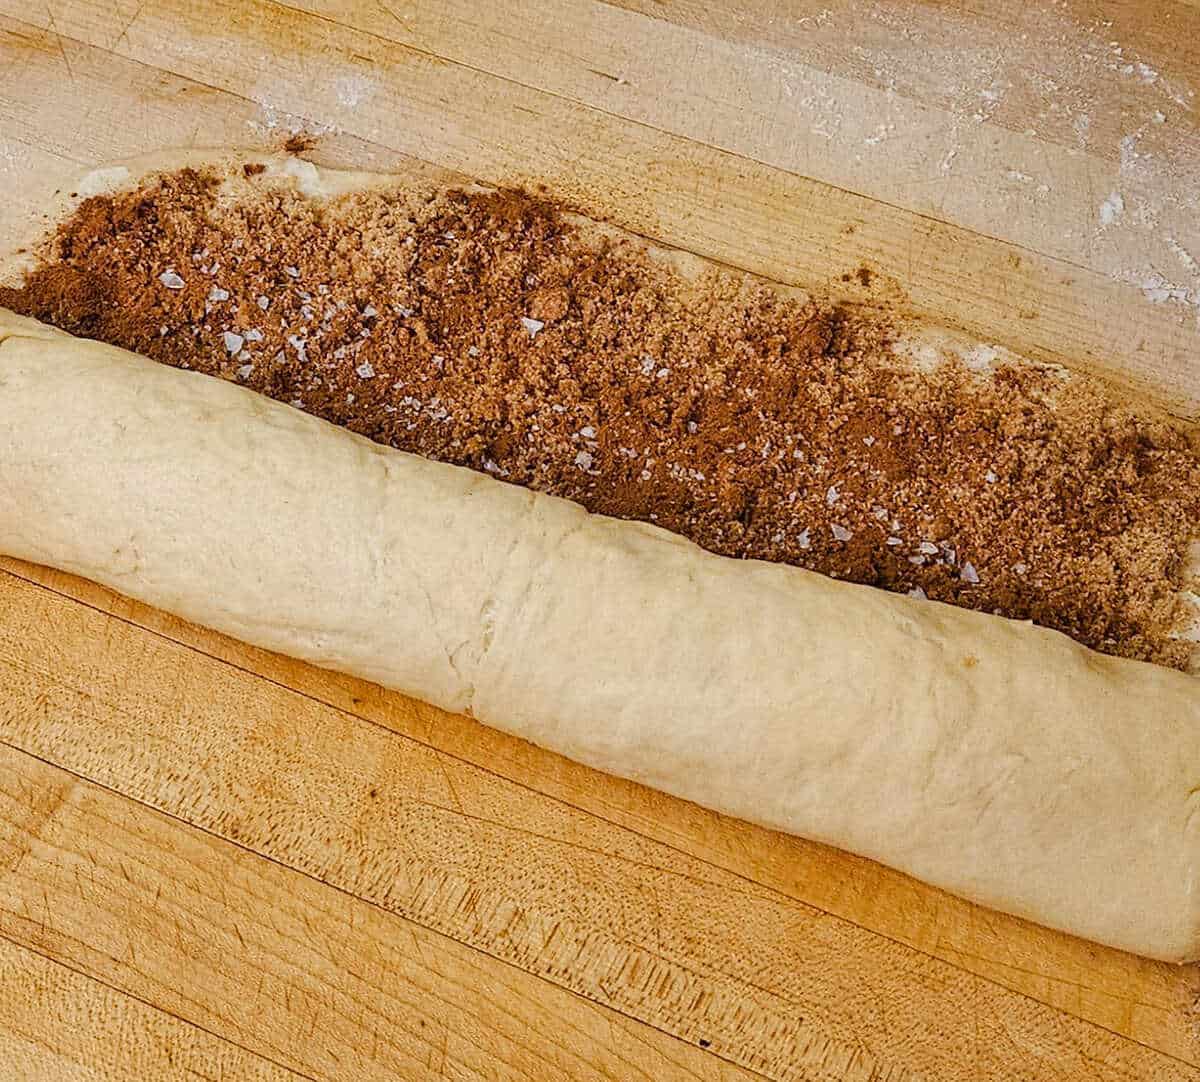 cinnamon roll dough with butter, brown sugar, cinnamon and sea salt filling being rolled into a log.